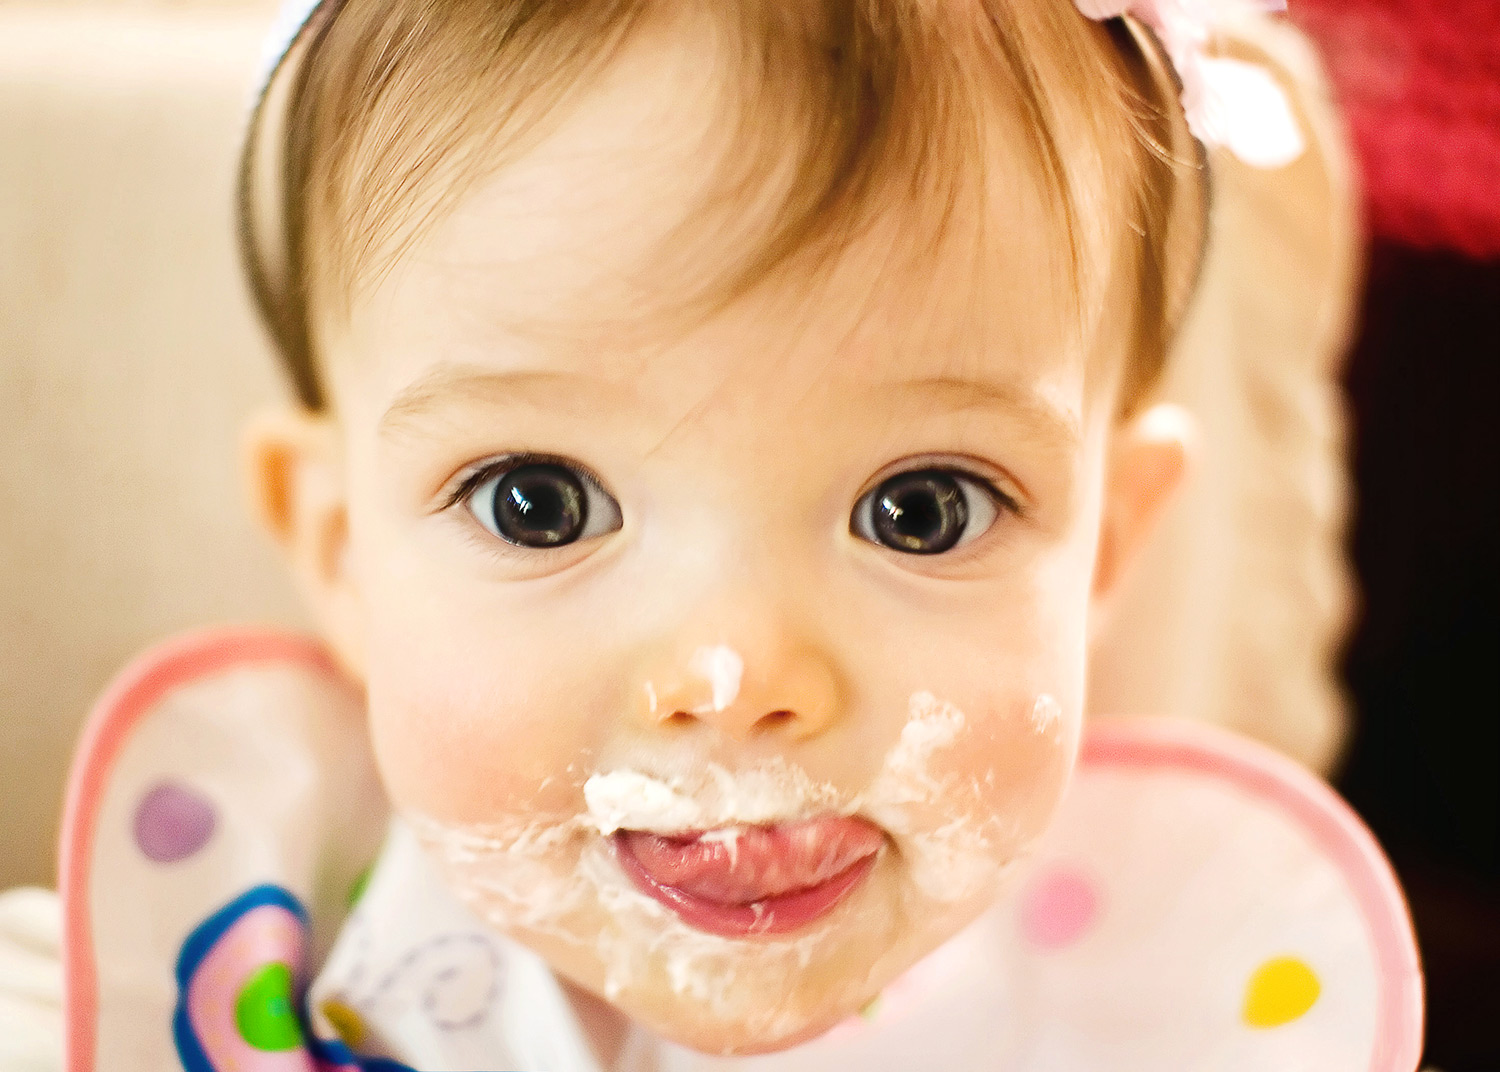 A photograph of my niece Amber enjoying a taste of cake at her first birthday party.